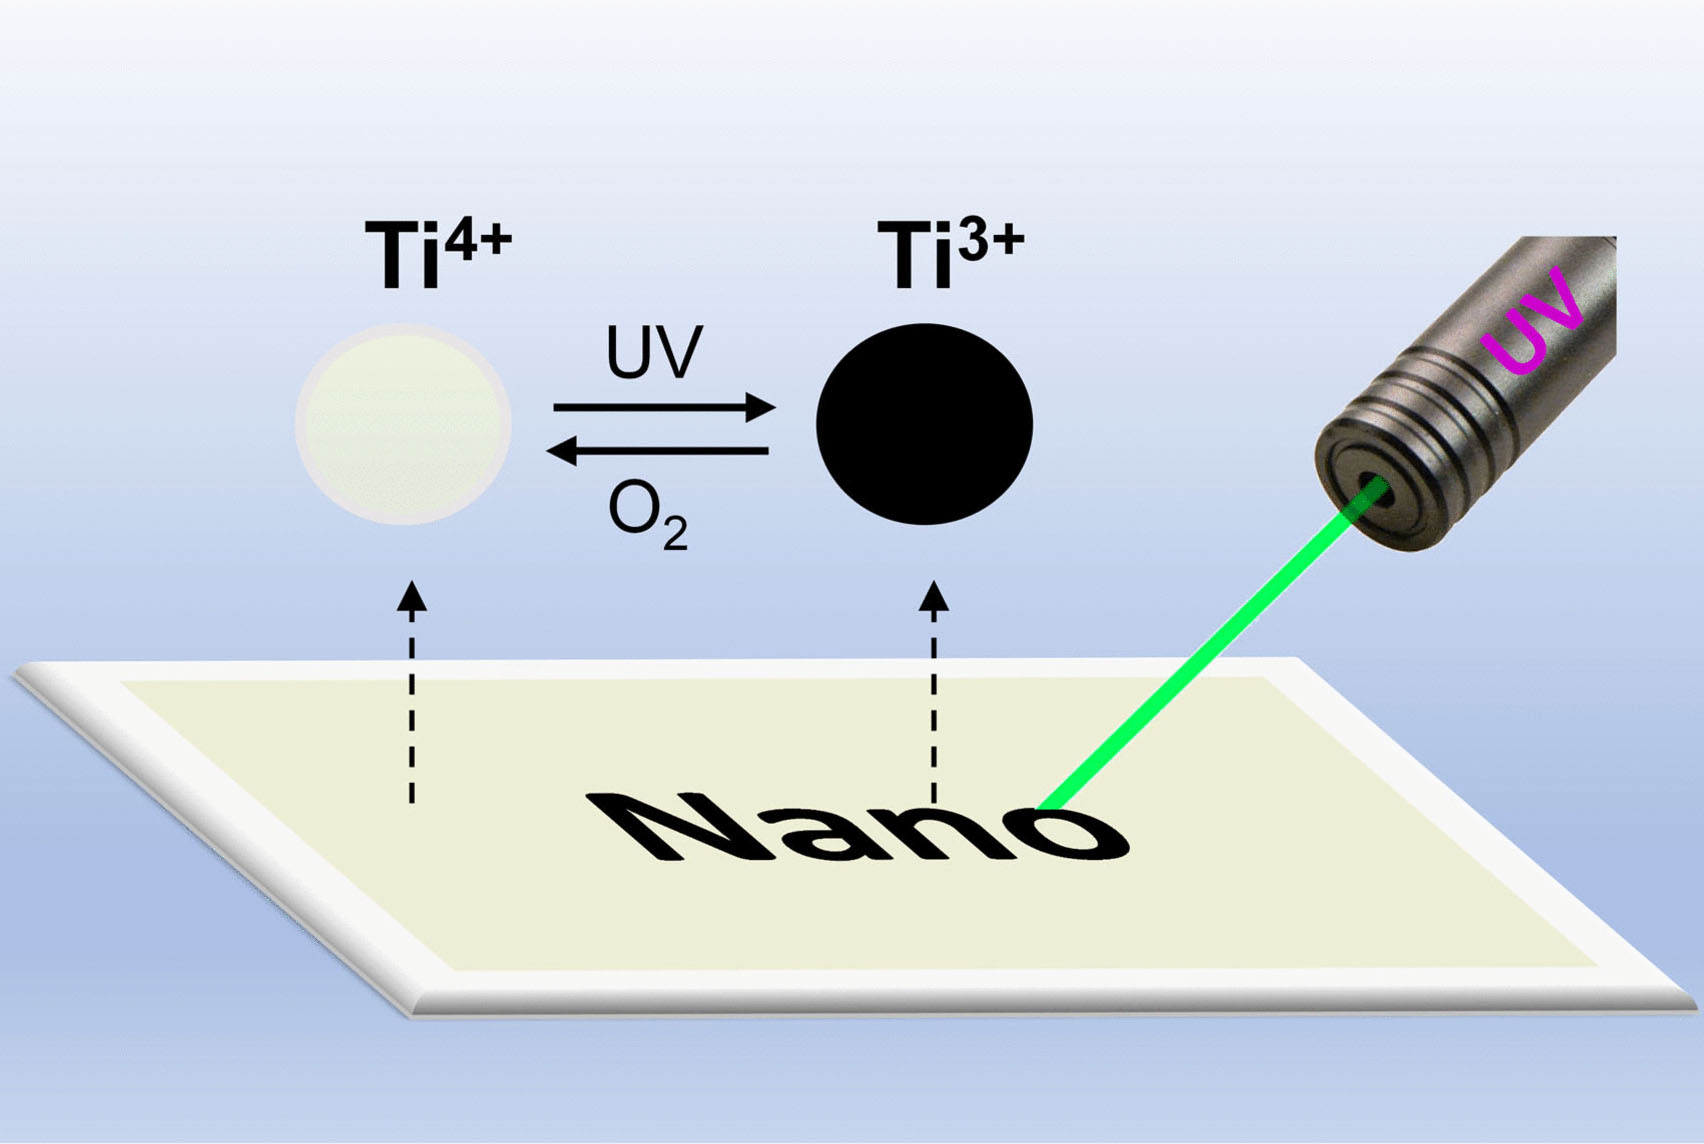 Rewritable UV-sensitive surfaces made from doped TiO2 nanocrystals